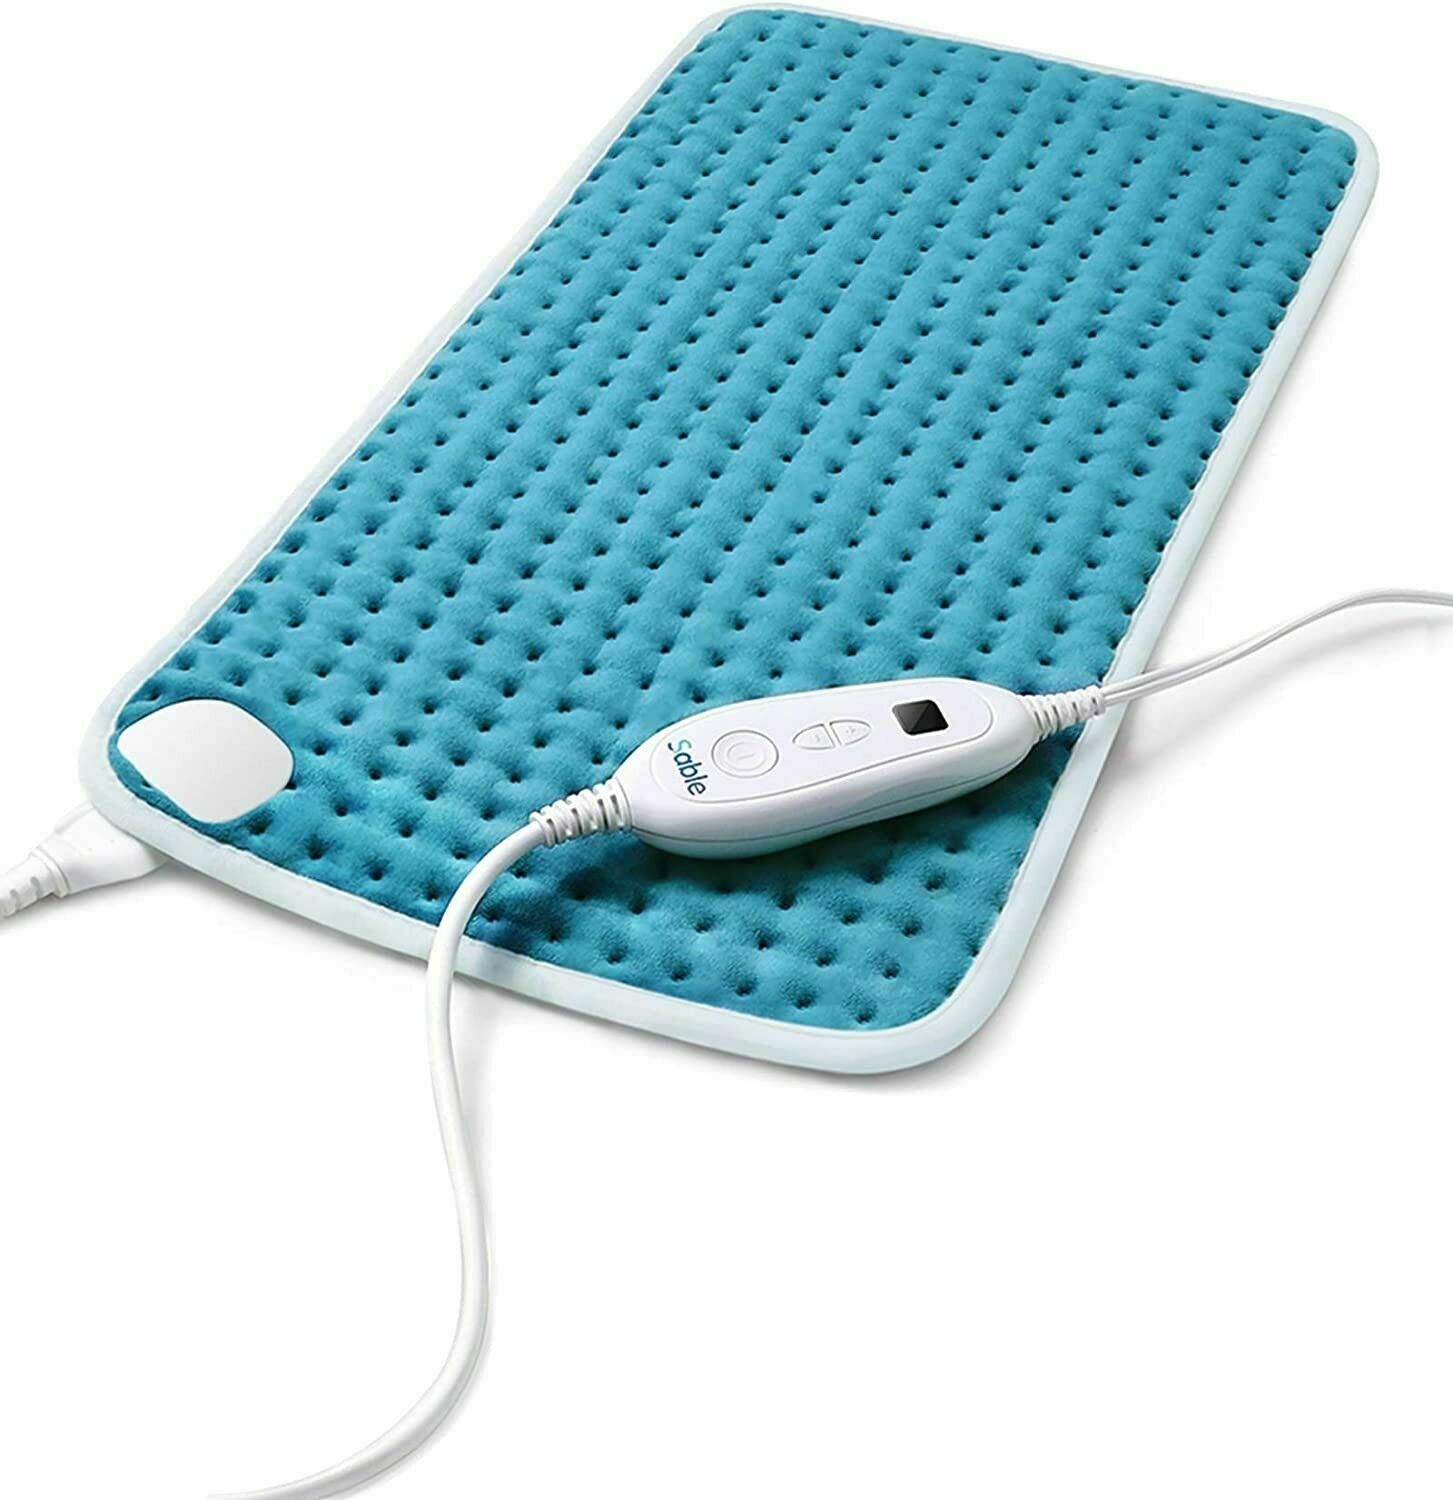 Sable Sa-bd041 12"x24" Heating Pad For Back Pain Cramps Relief